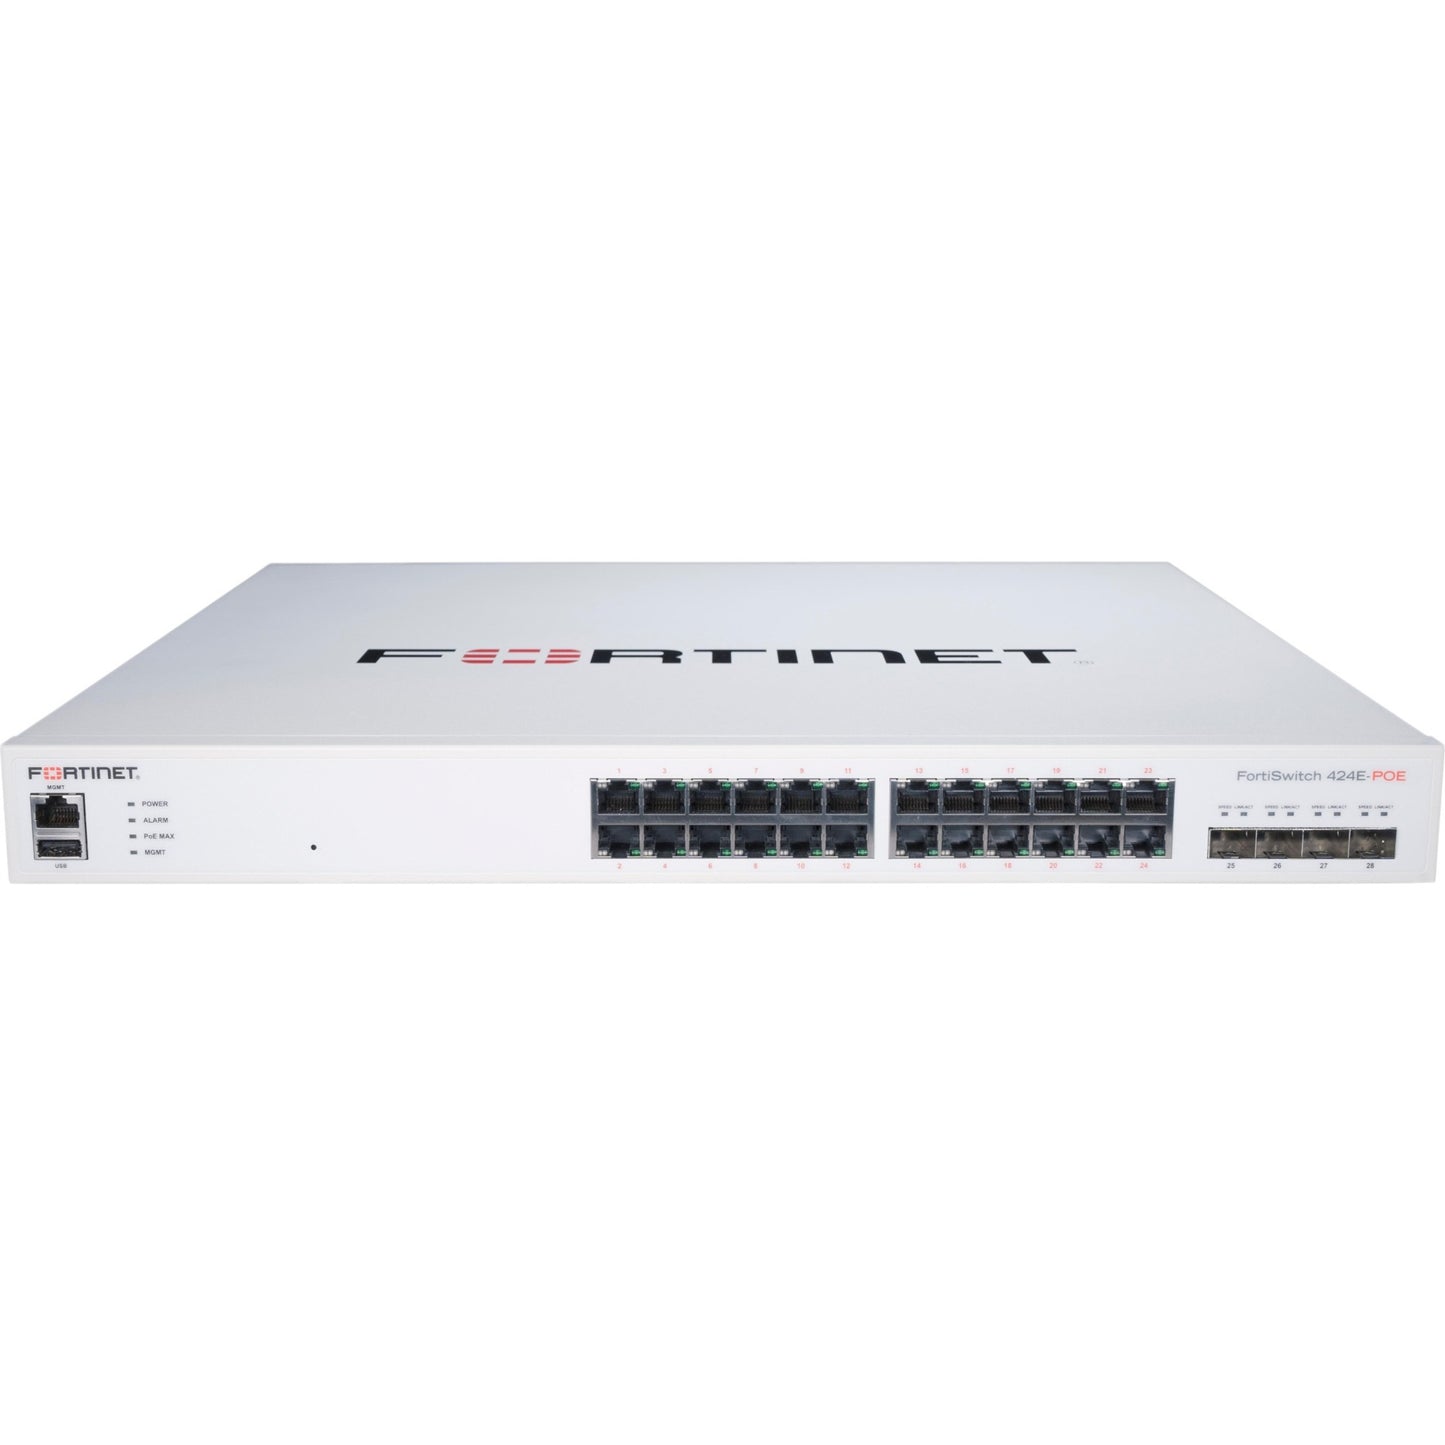 Fortinet FortiSwitch Layer 2/3 24xGE Port Ethernet Switch - FS-424E-POE